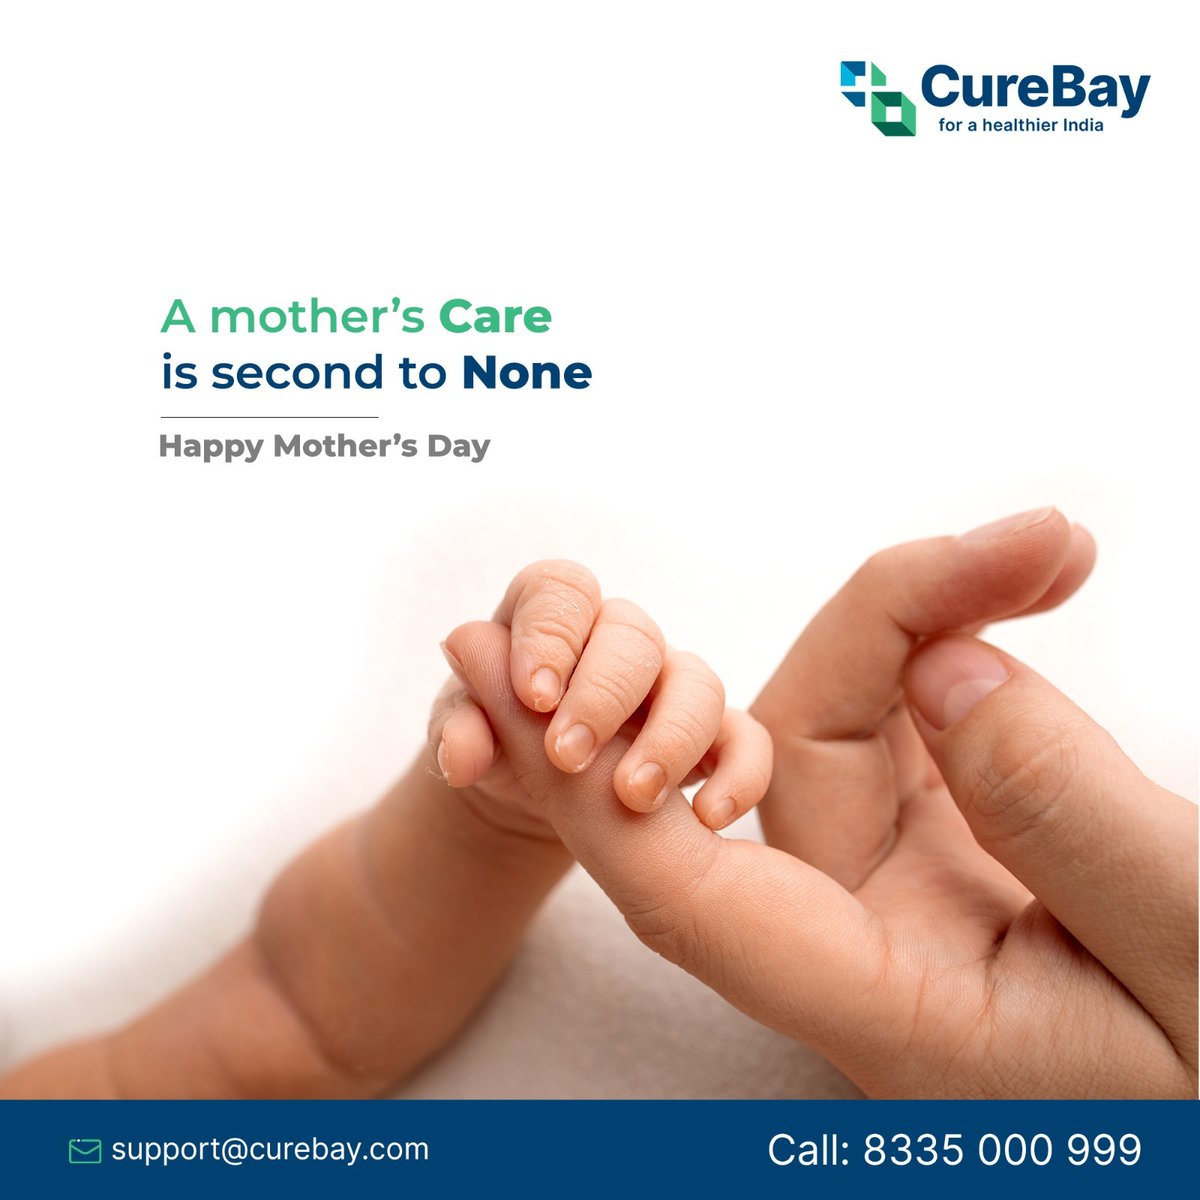 May her care and life learning lessons inspire us to build a world with proper health, wellness and awareness. Wishing everyone a Happy Mother's day. Visit: curebay.com #MothersDay #Inspiration #Care #CureBay #Healthcareforall